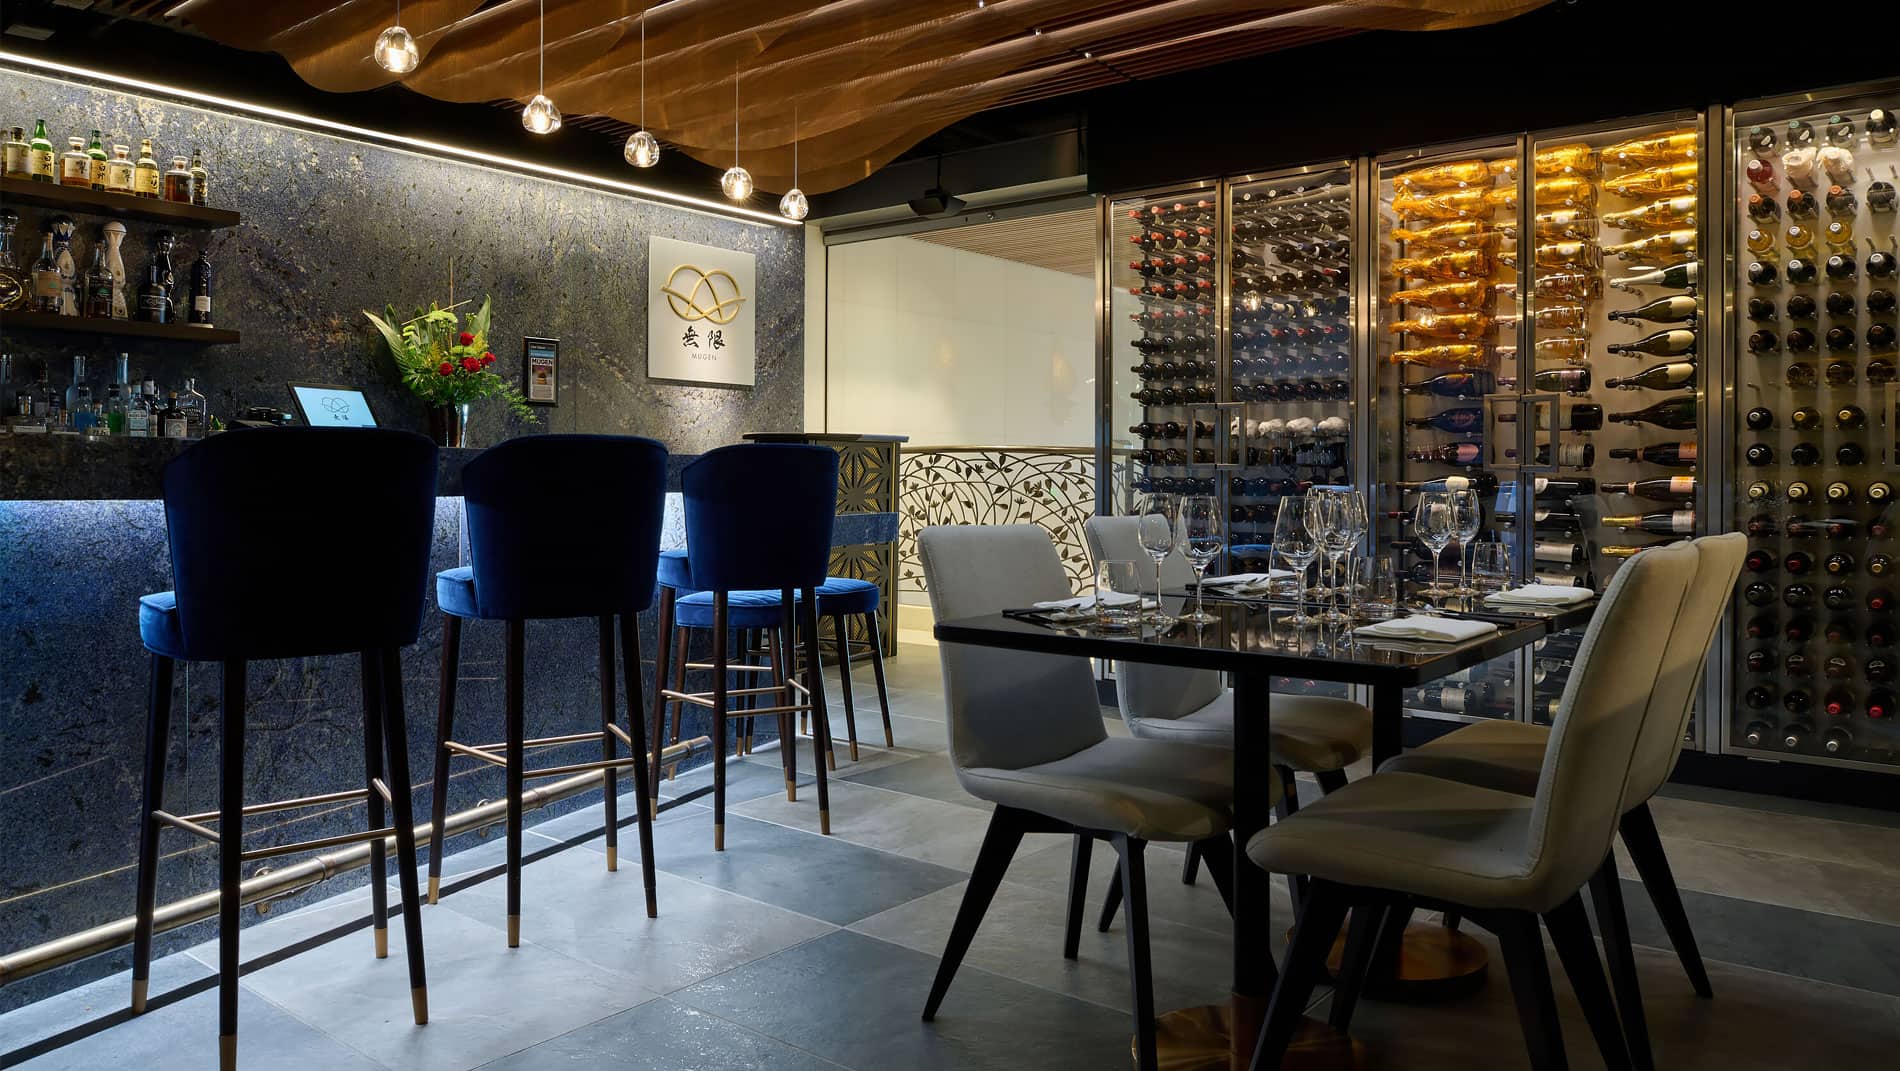 Dining room at Mugen, including a bar with cushioned tall chairs and a wall with a floor to ceiling wine display.